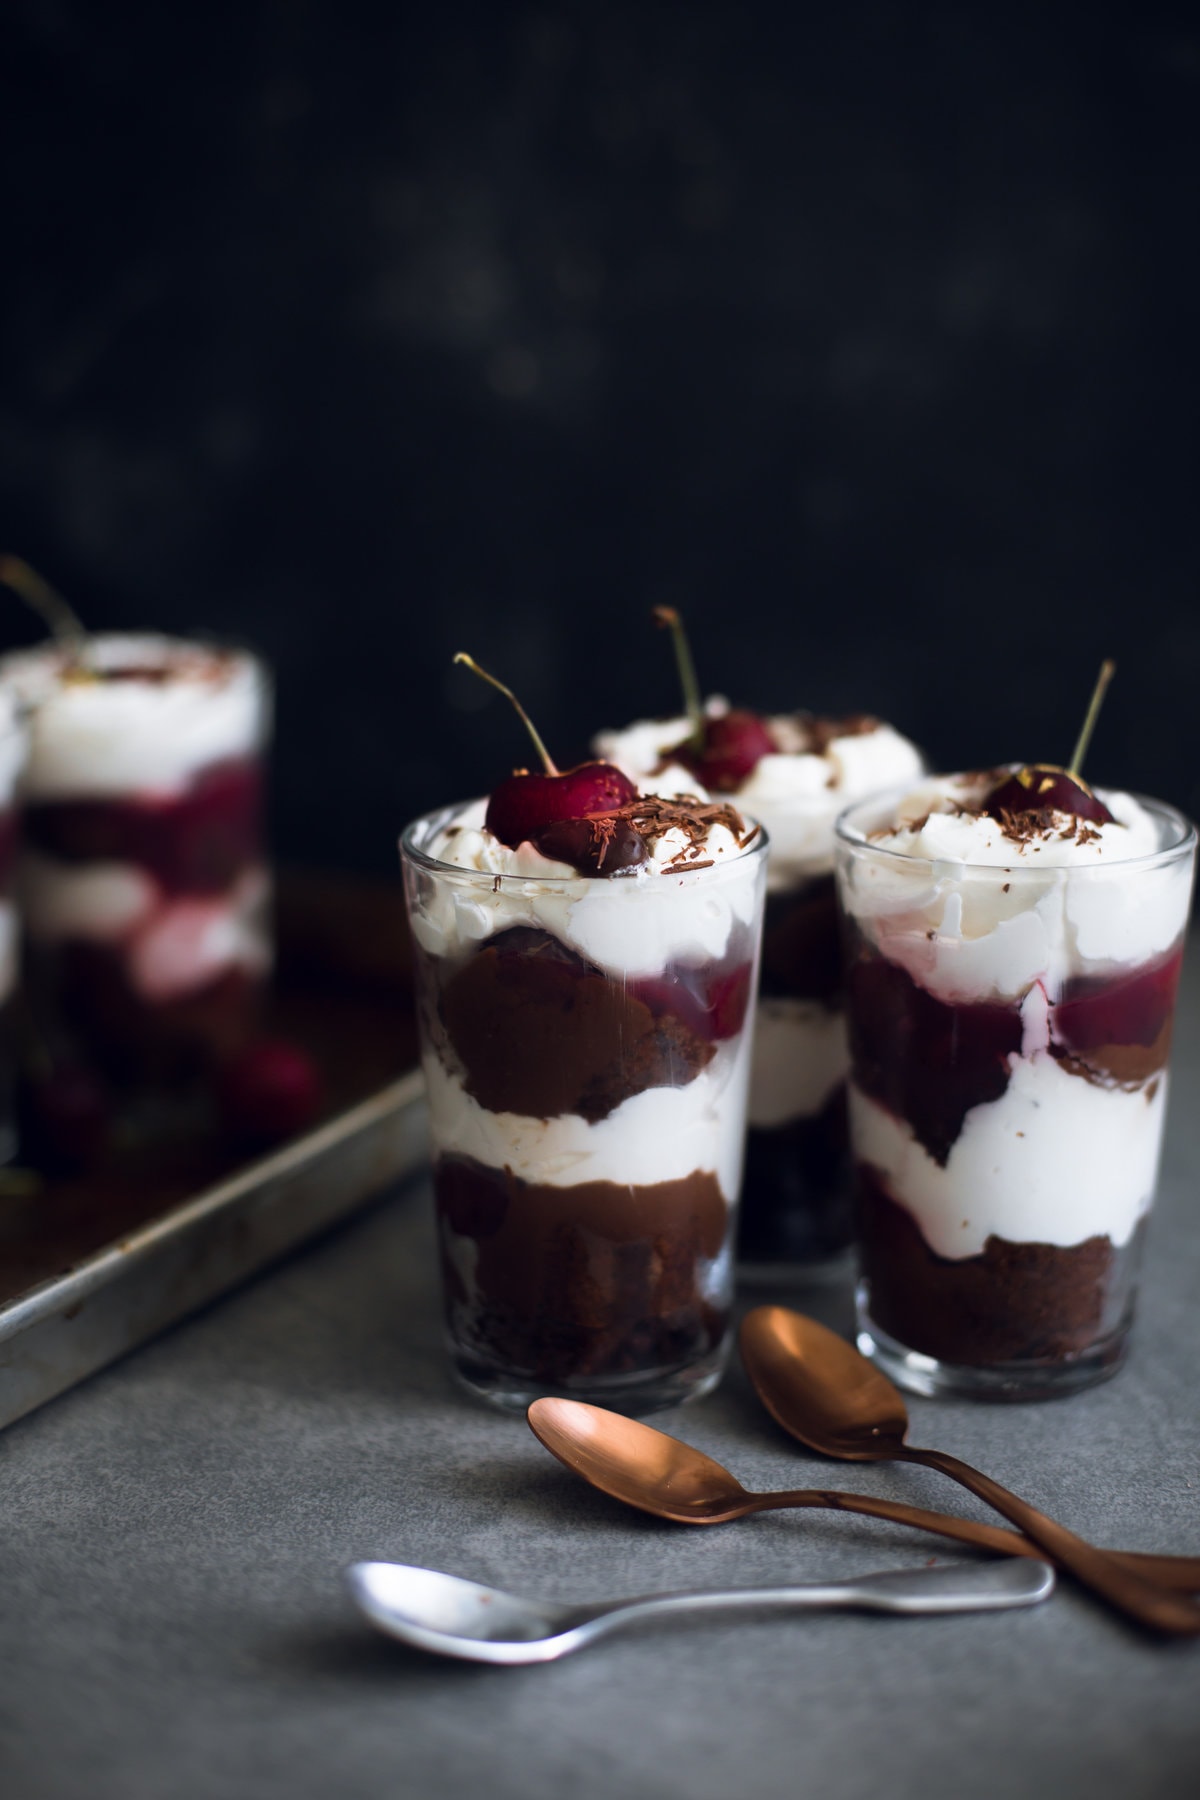 A delicious Vegan Black Forest Cake Trifle. Chocolate Sponge, Kirsch Soaking Syrup, Cherry Filling and Whipped Cream. 100% Omni Approved! #blackforest #cake #cherries #chocolate #cream #dessert #vegandesserts #simple #chocolatedesserts